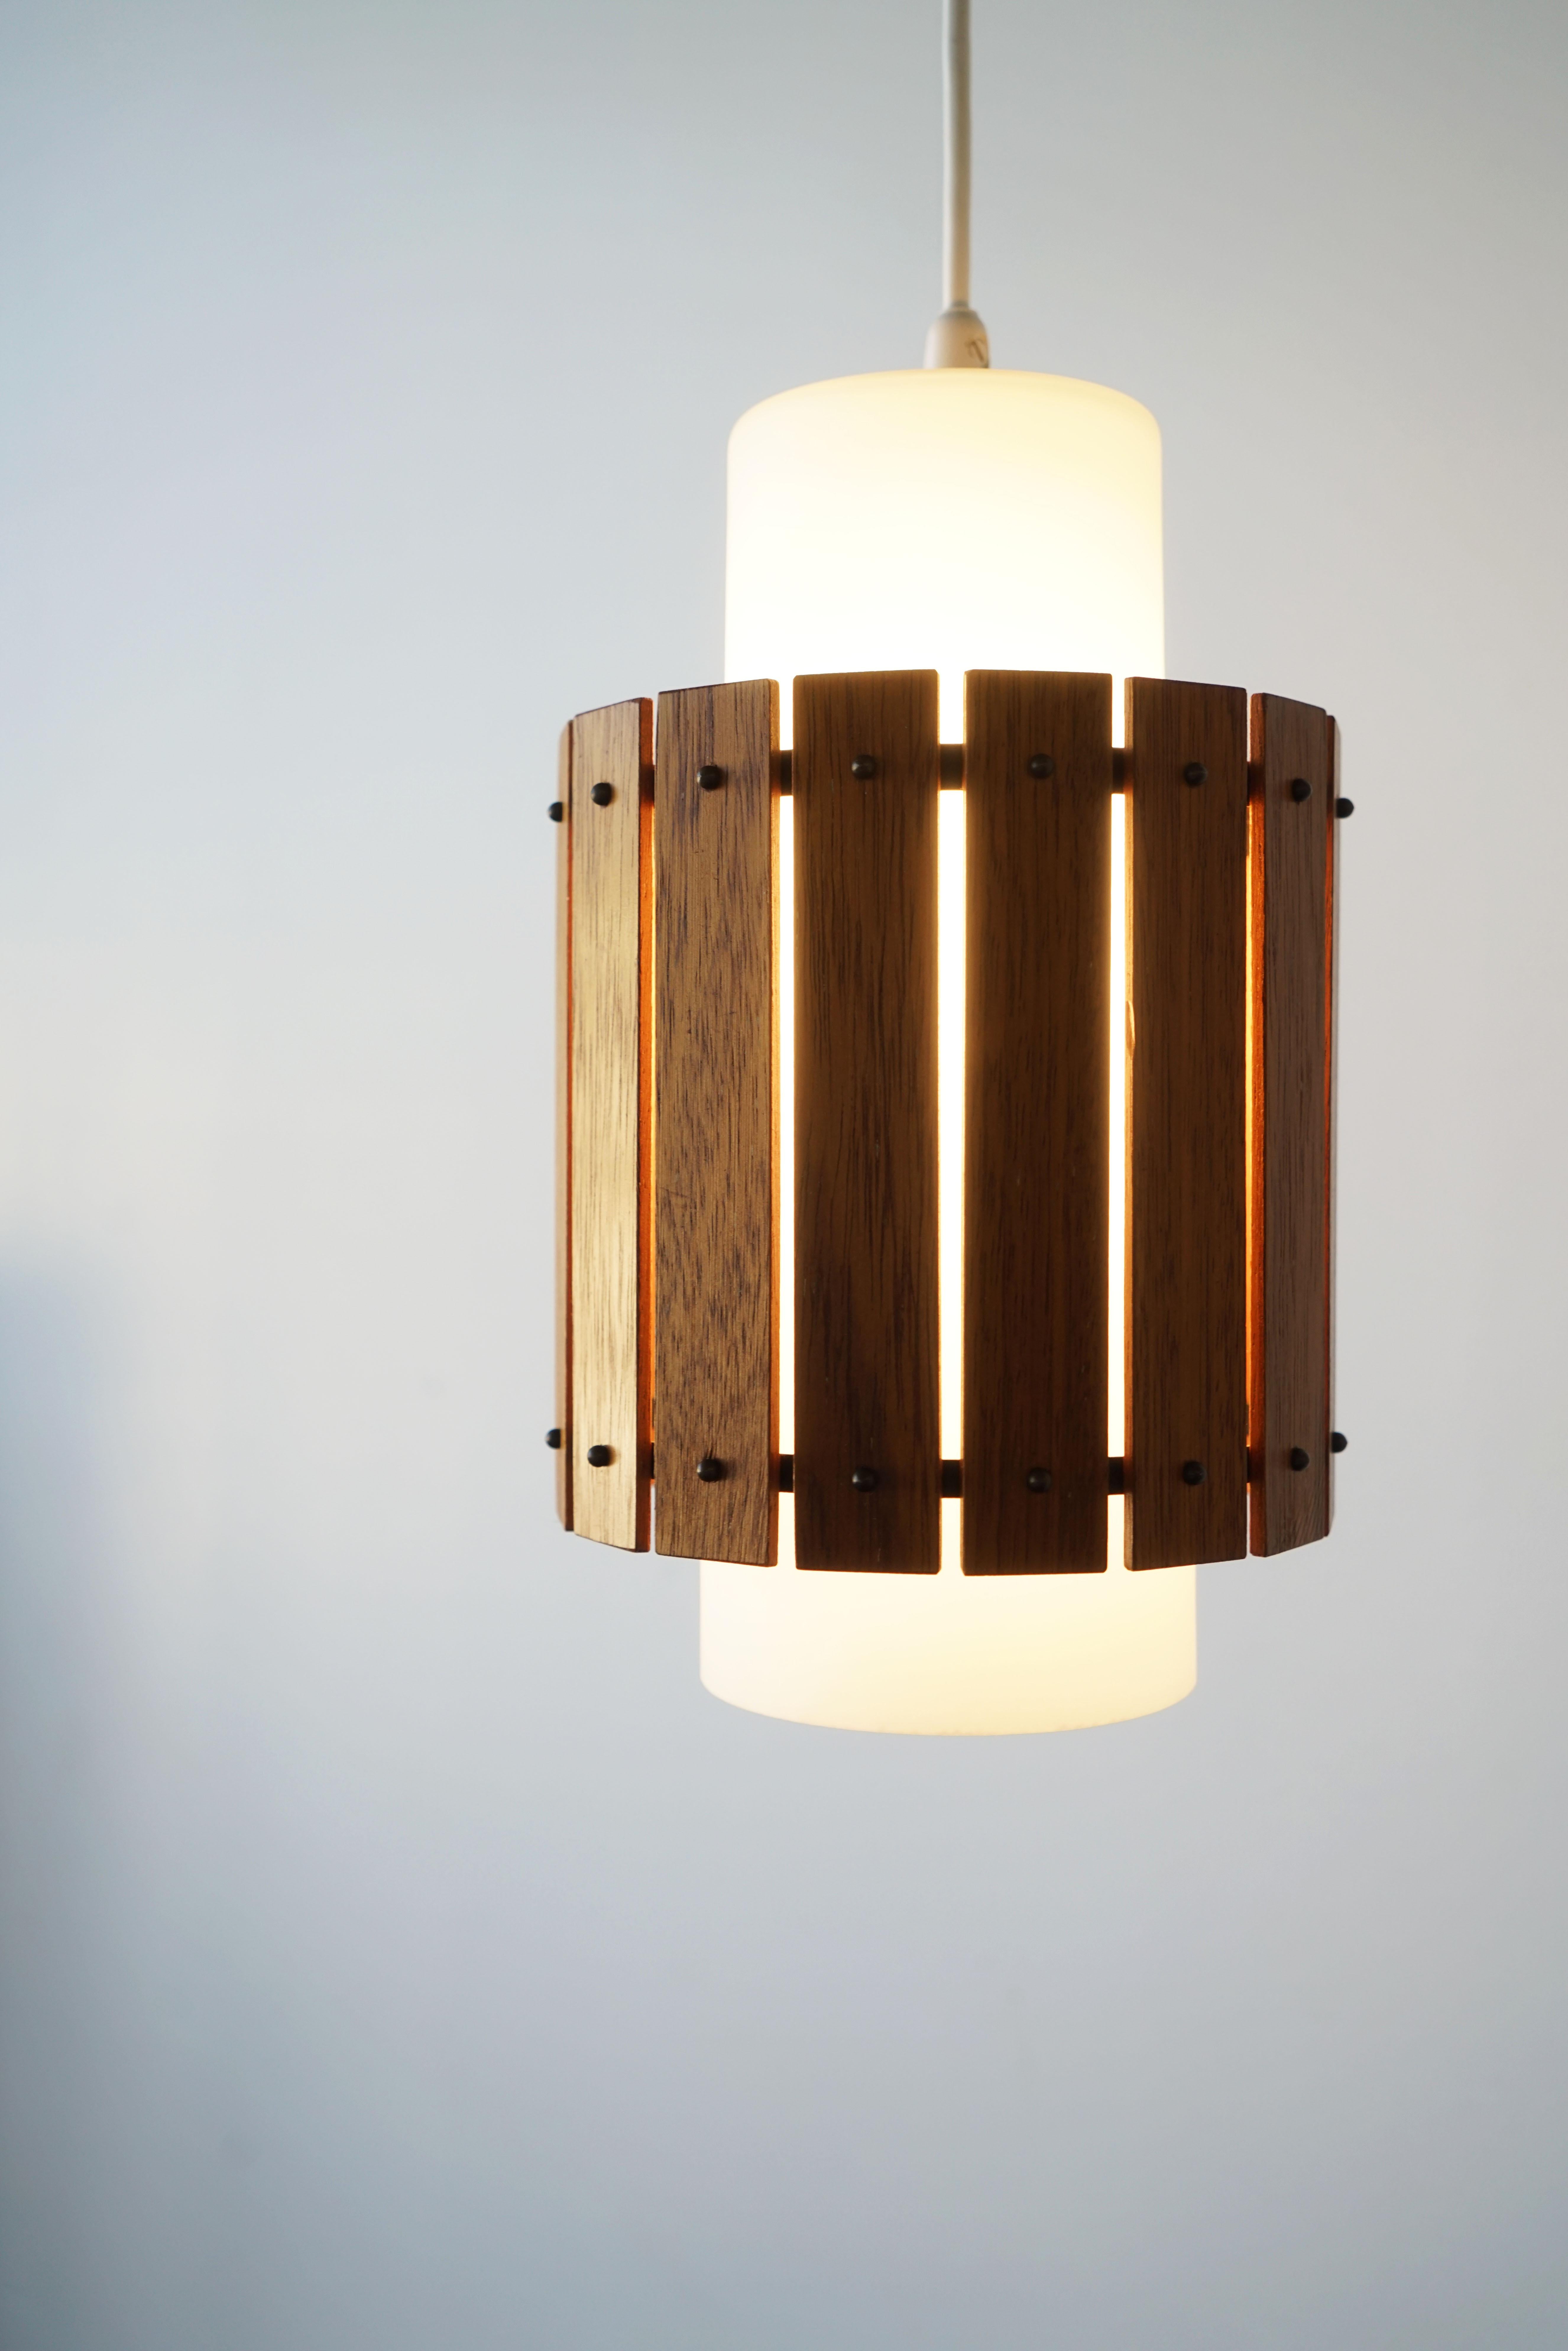 Small Pendant lamp Maria Lindeman for Idman, 1950's Scandinavian Modern In Good Condition For Sale In Chicago, IL